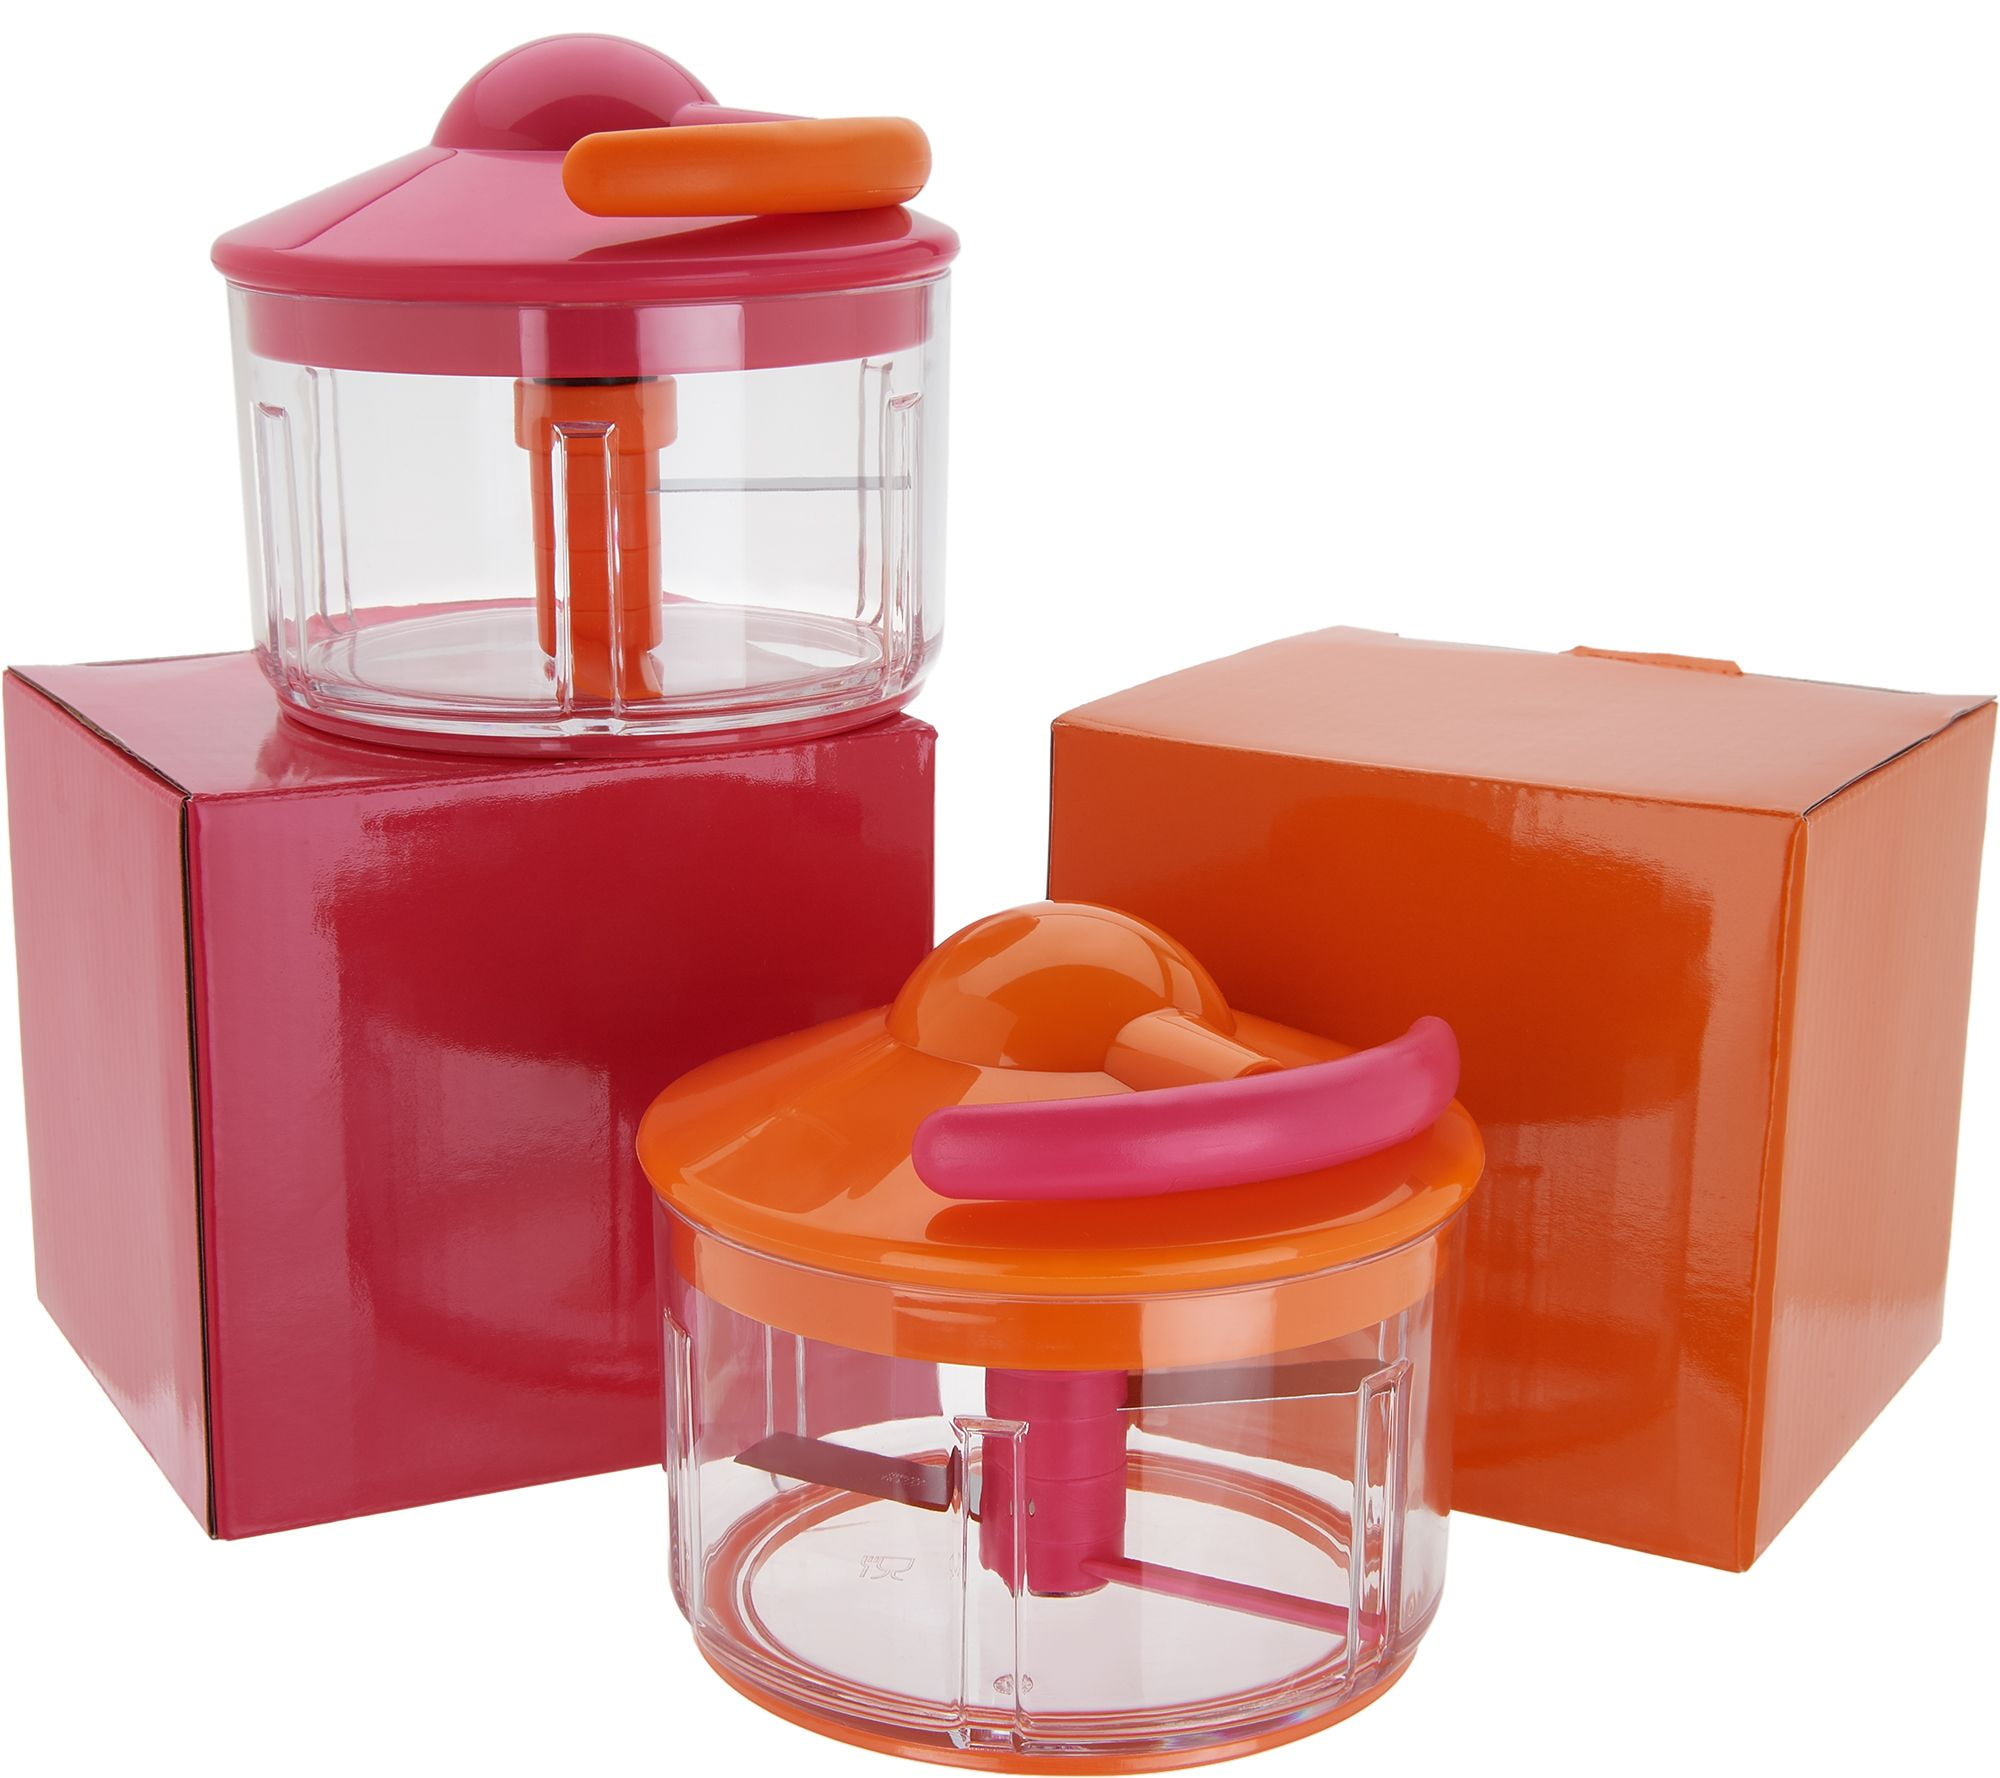 Kuhn Rikon Introduces Easy Storage, Food Prep, Children's Products